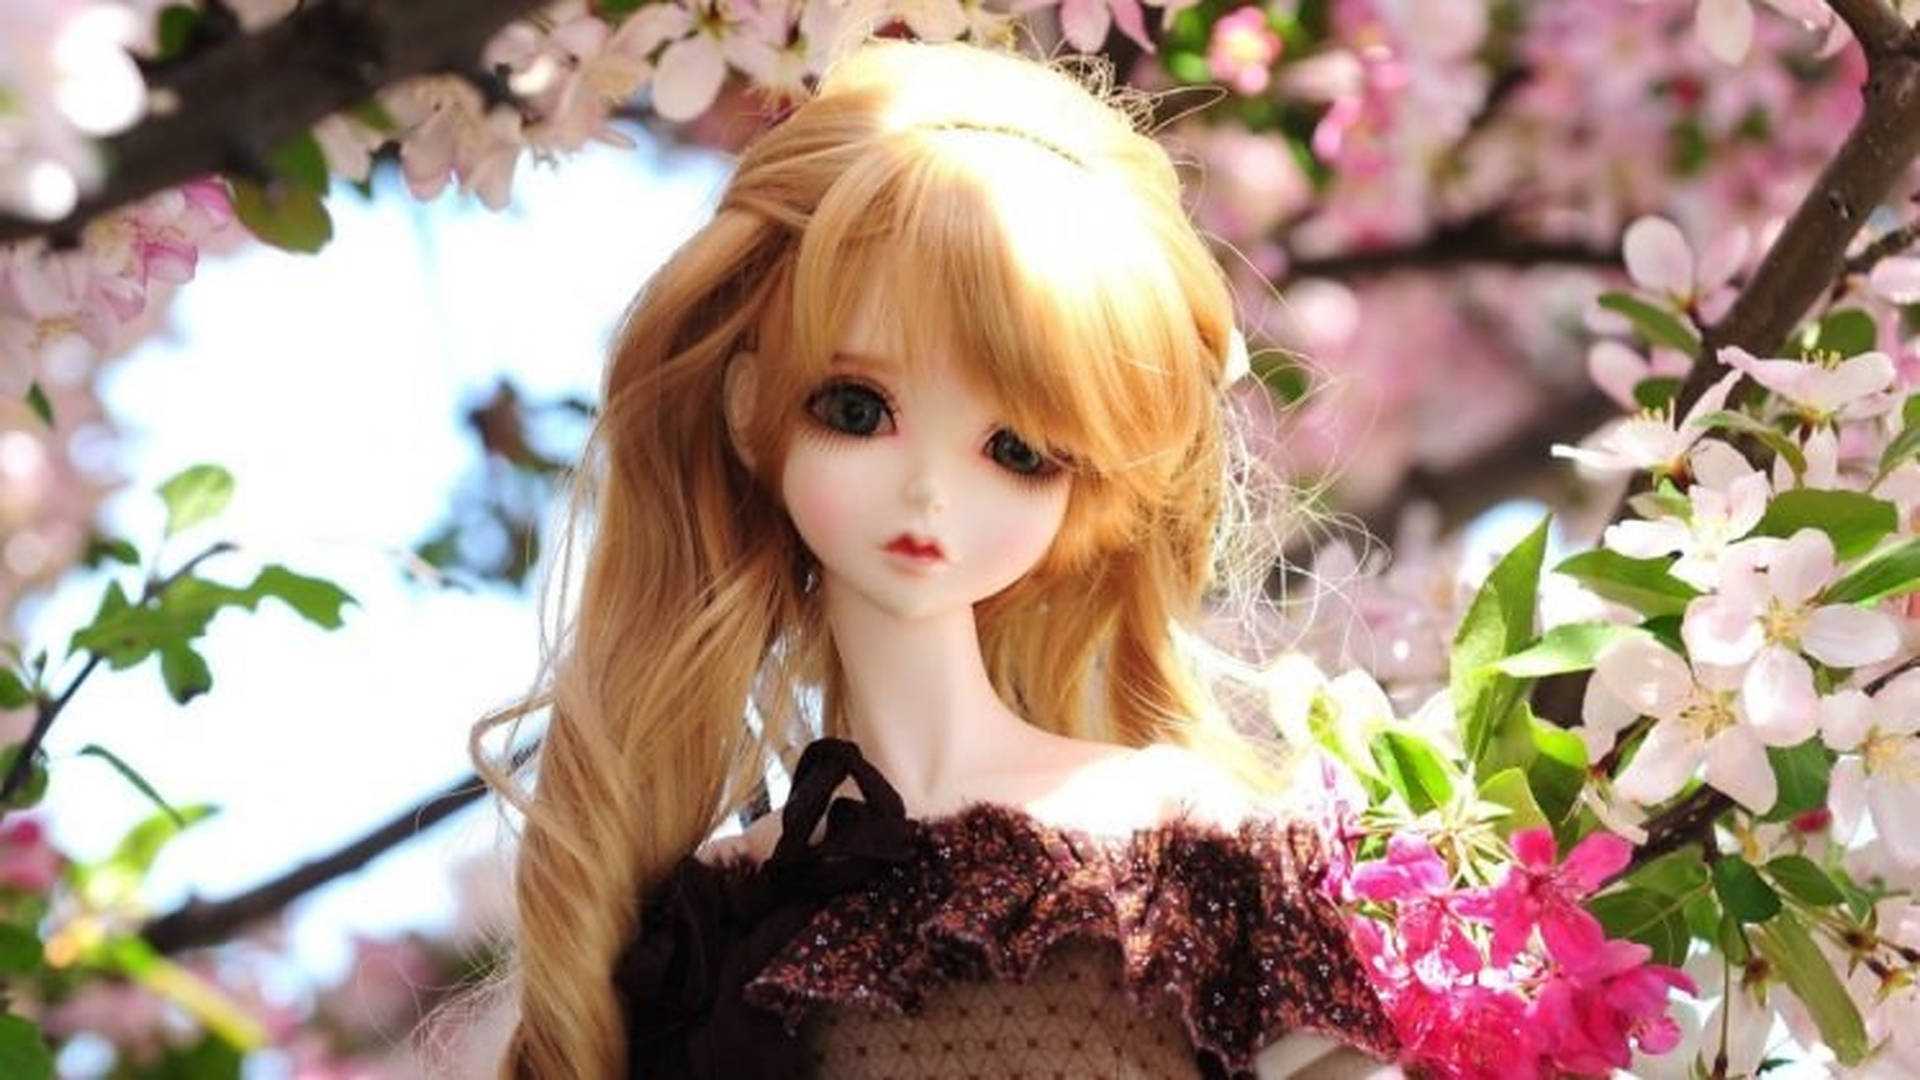 Doll And Cherry Blossoms Background